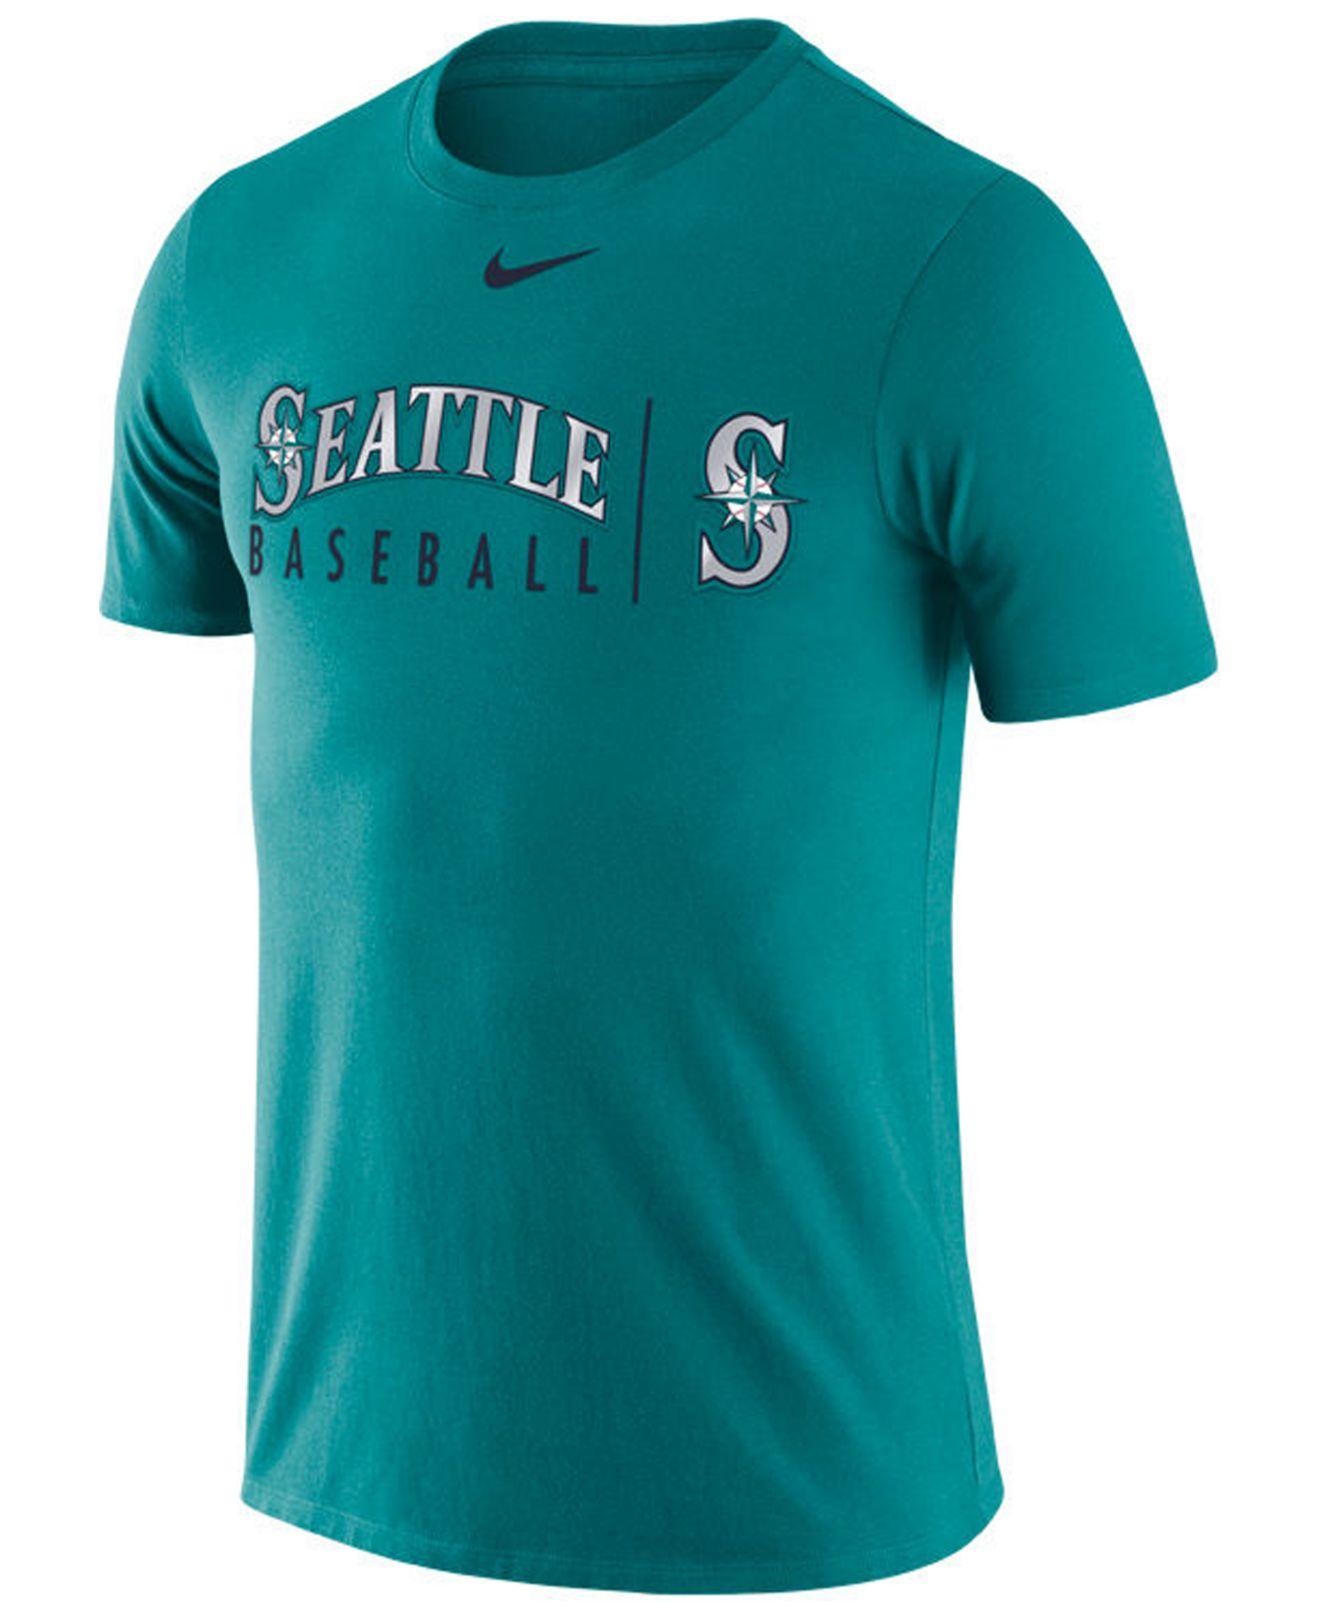 Lyst - Nike Seattle Mariners Dri-fit Practice T-shirt in Blue for Men